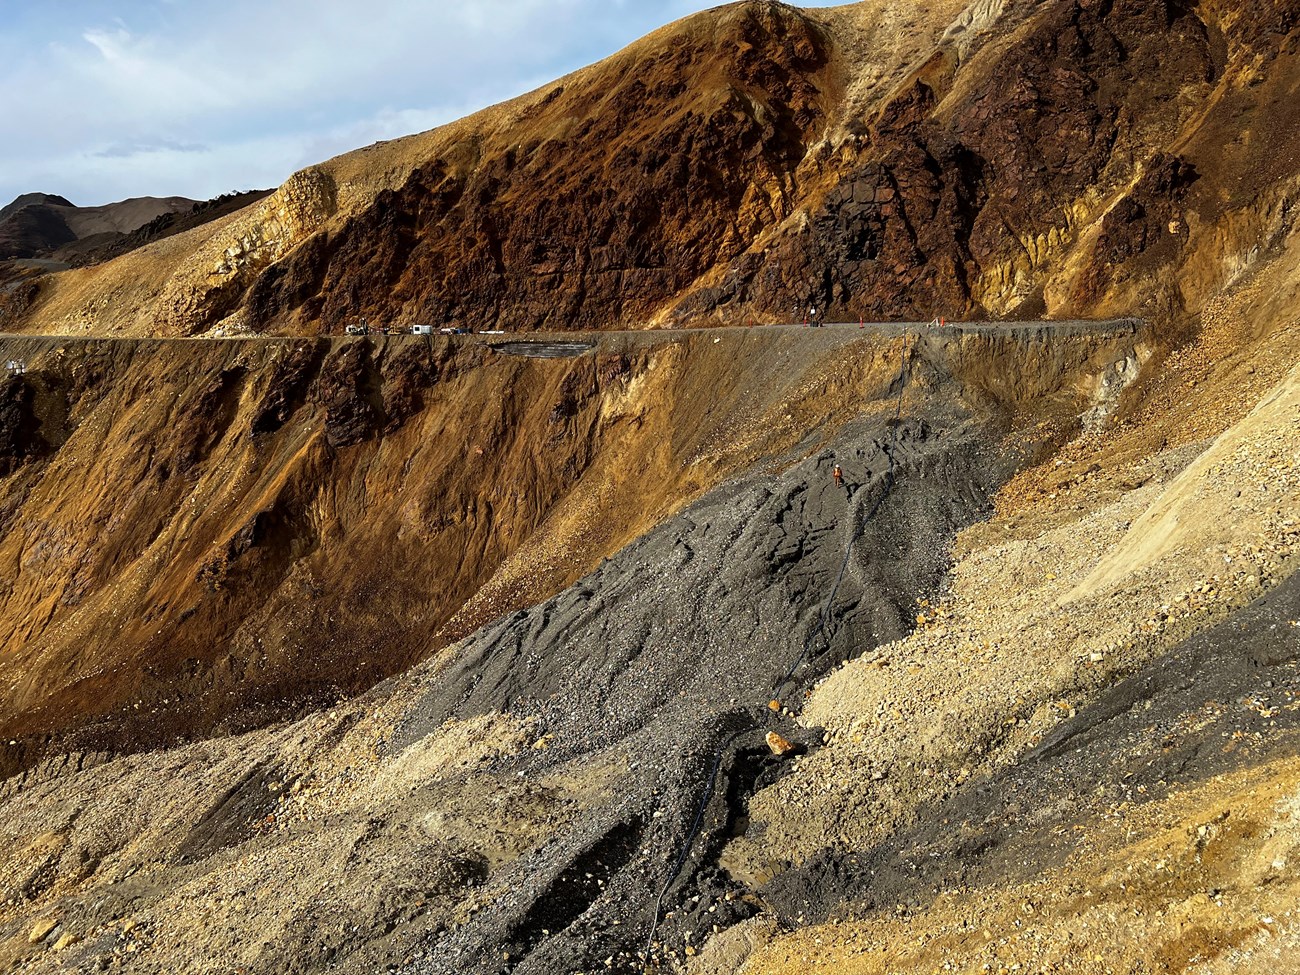 A mountainside of bare orange, yellow, brown, and gray rock. On the far side of the slope, a flat road is cut into the mountain, then suddenly drops away and piles of slumping rock can be seen below the road. Two people work with equipment on the rock.